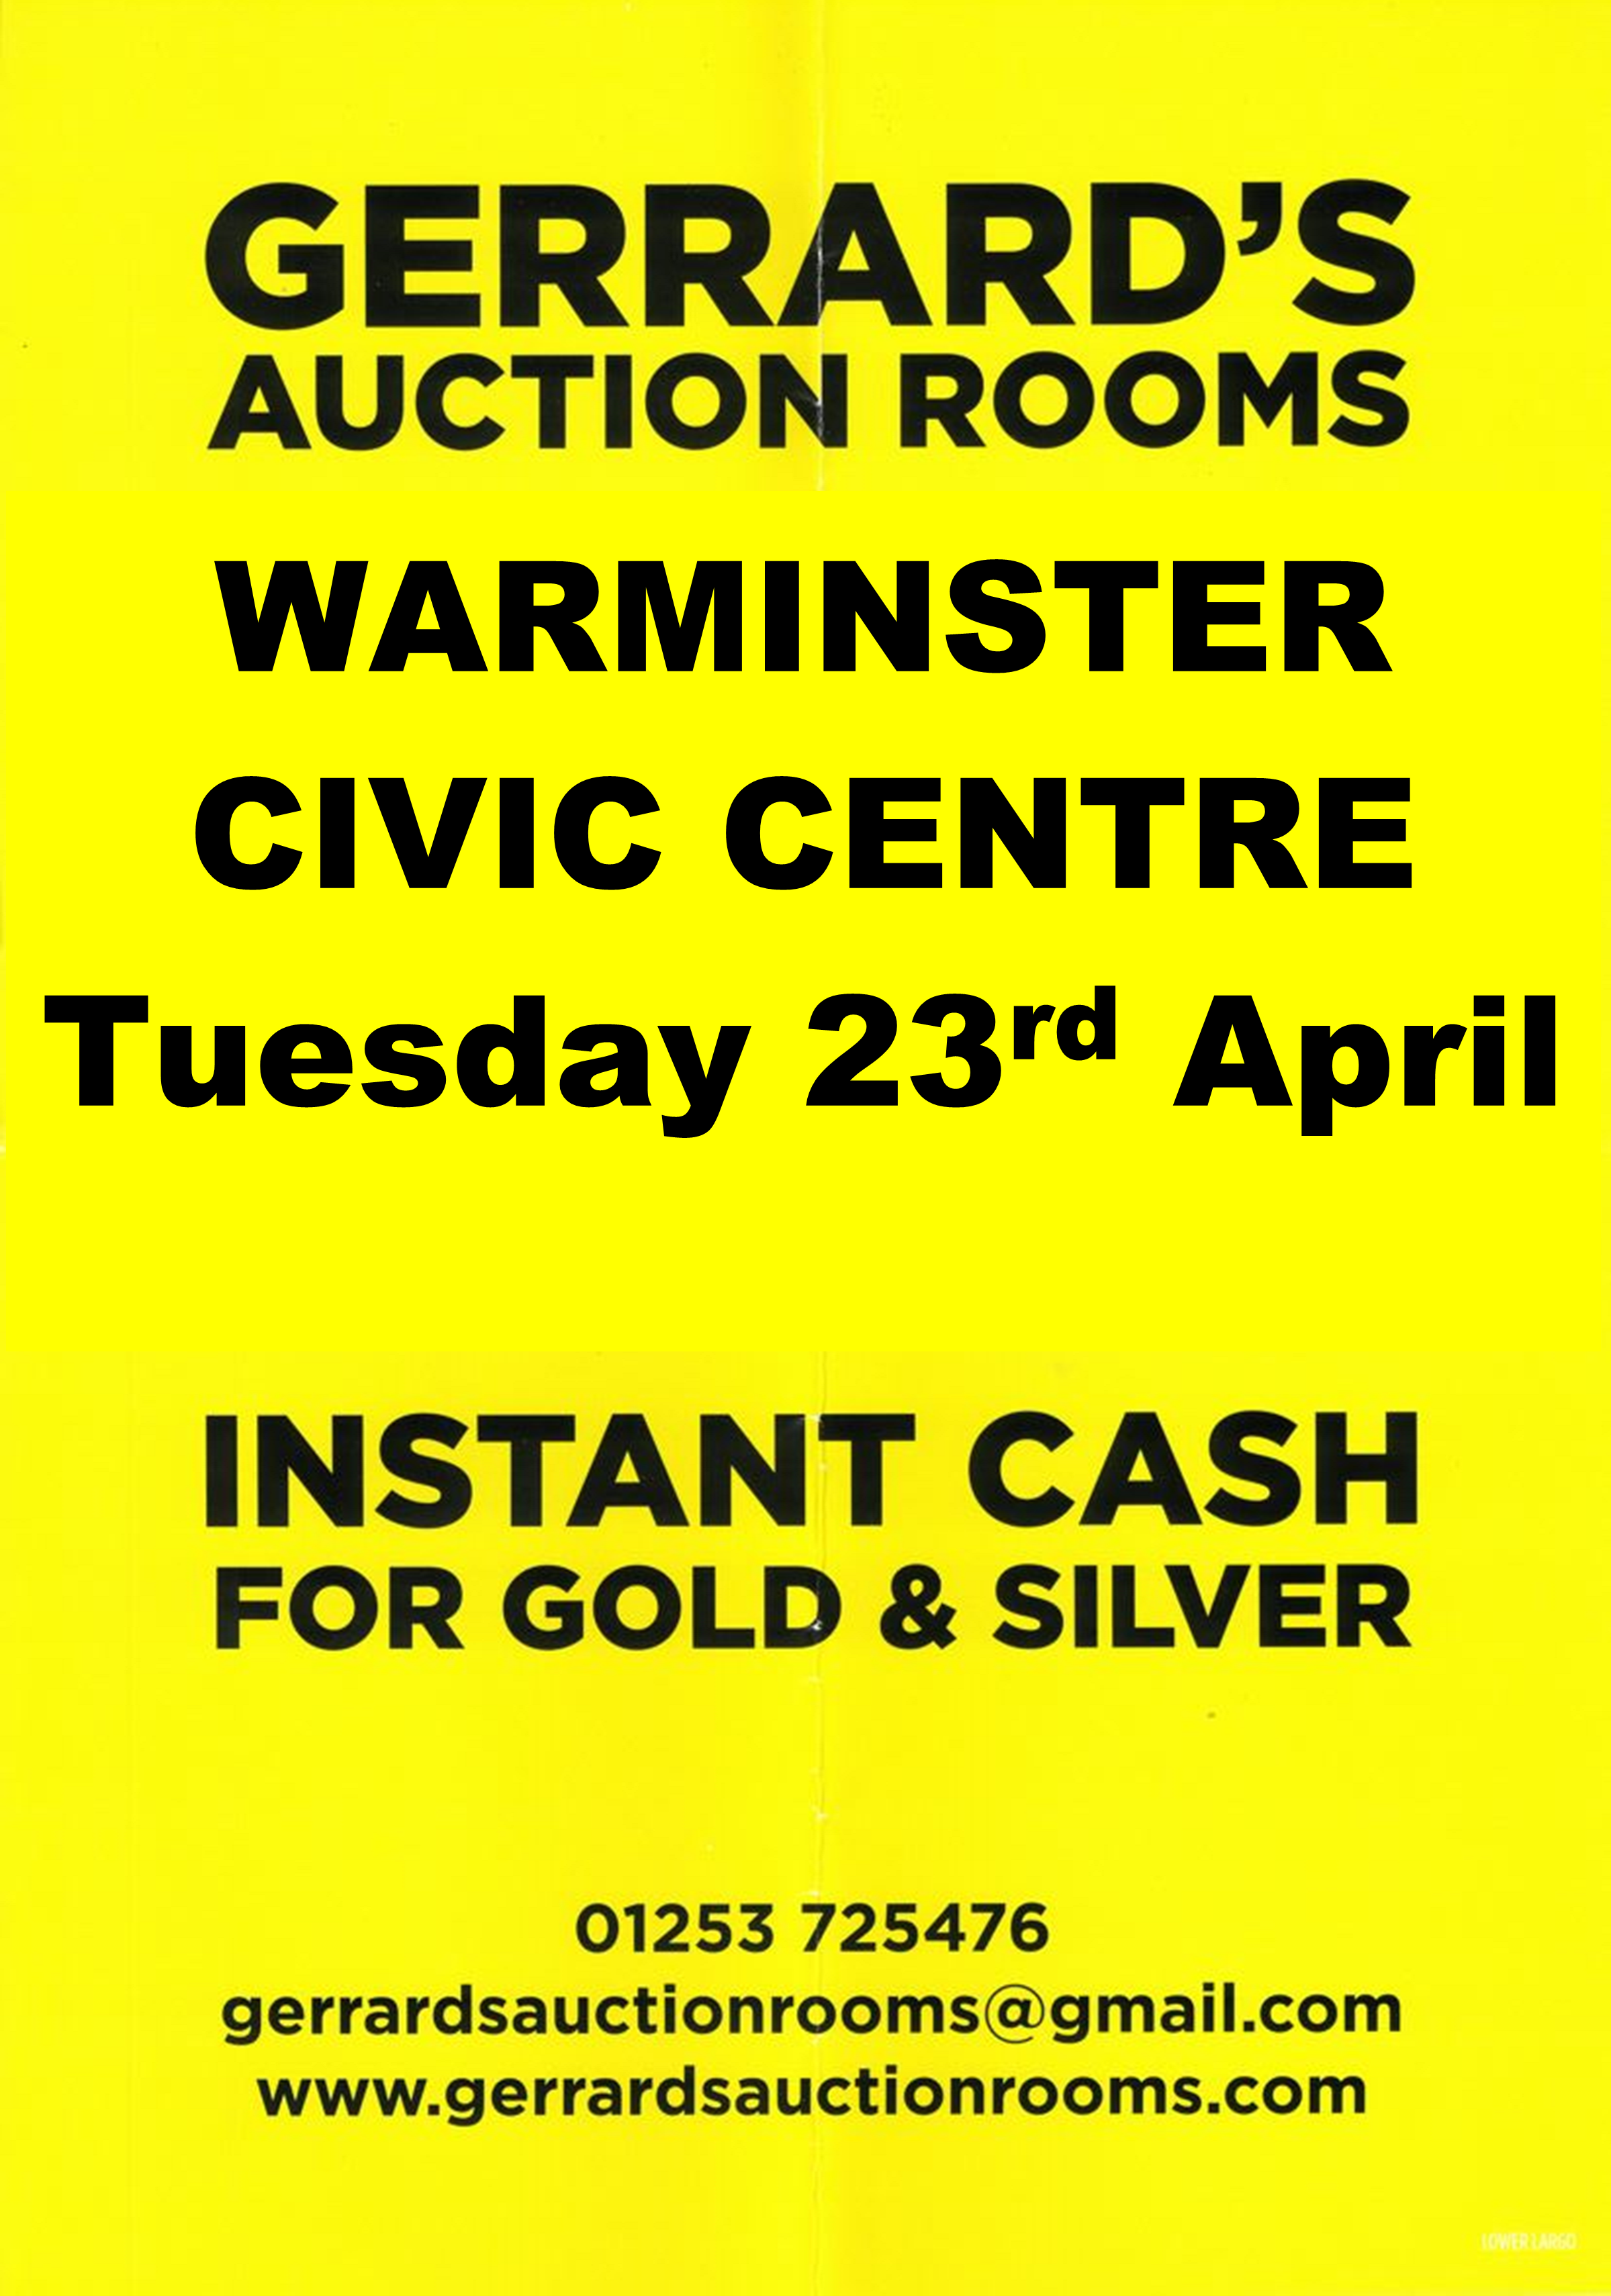 Gerrard's Auction Rooms - Instant Cash for Gold & Silver